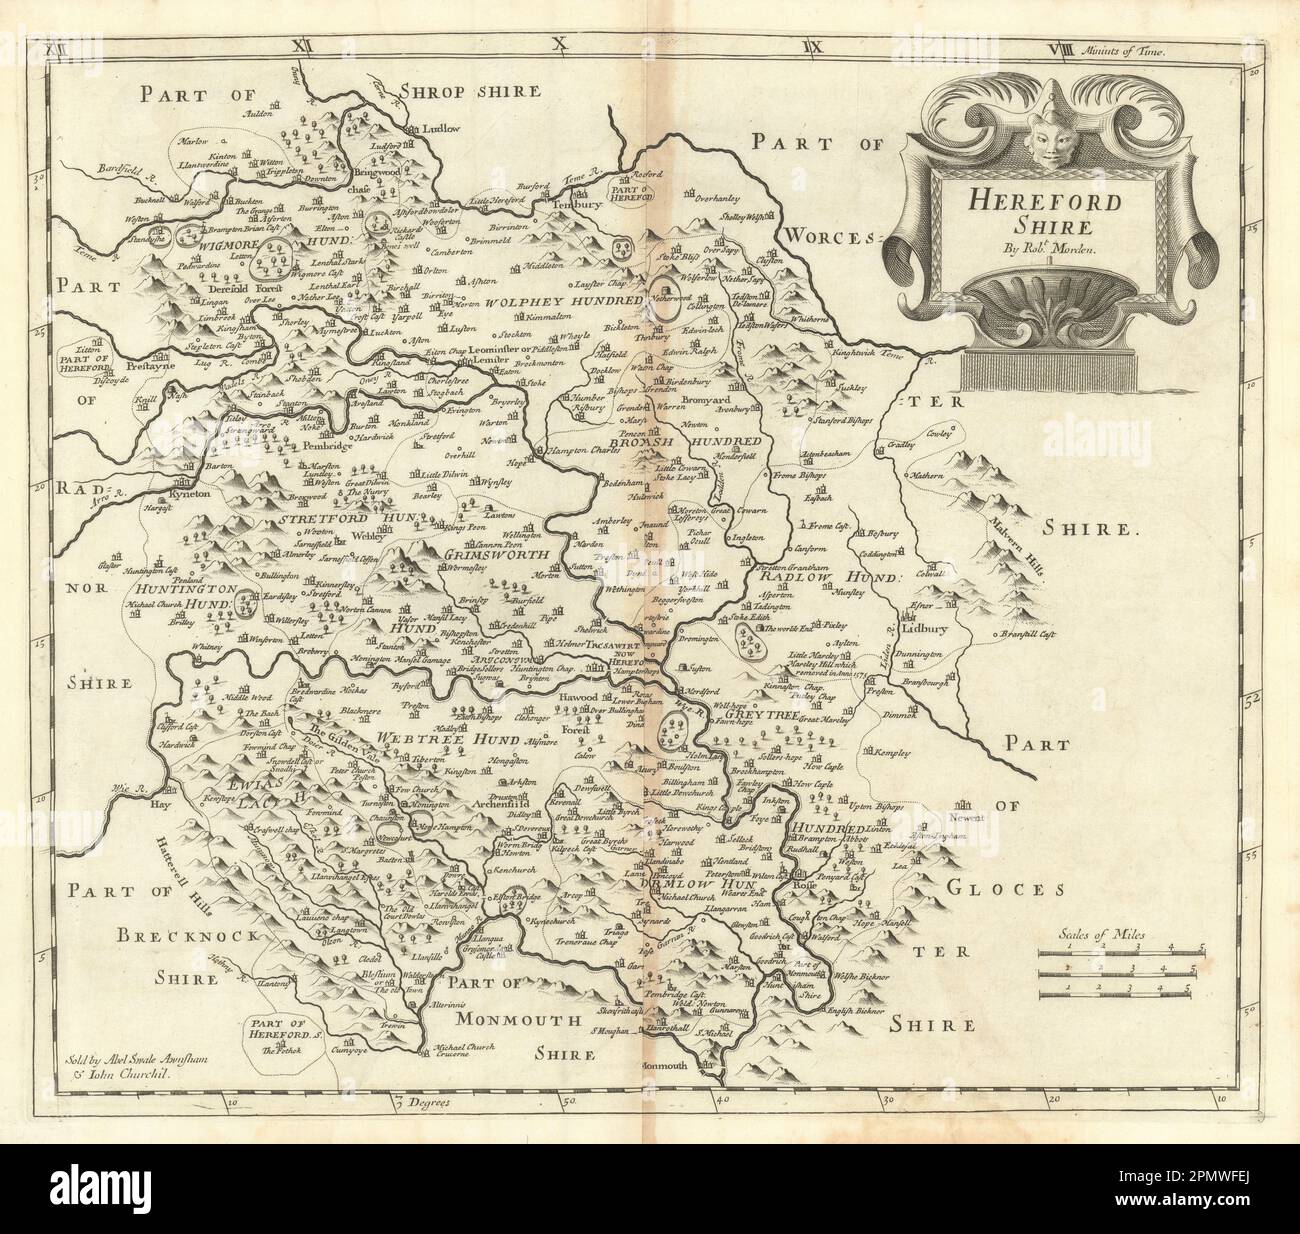 Herefordshire. 'HEREFORD SHIRE' by ROBERT MORDEN. Camden's Britannia 1695 map Stock Photo